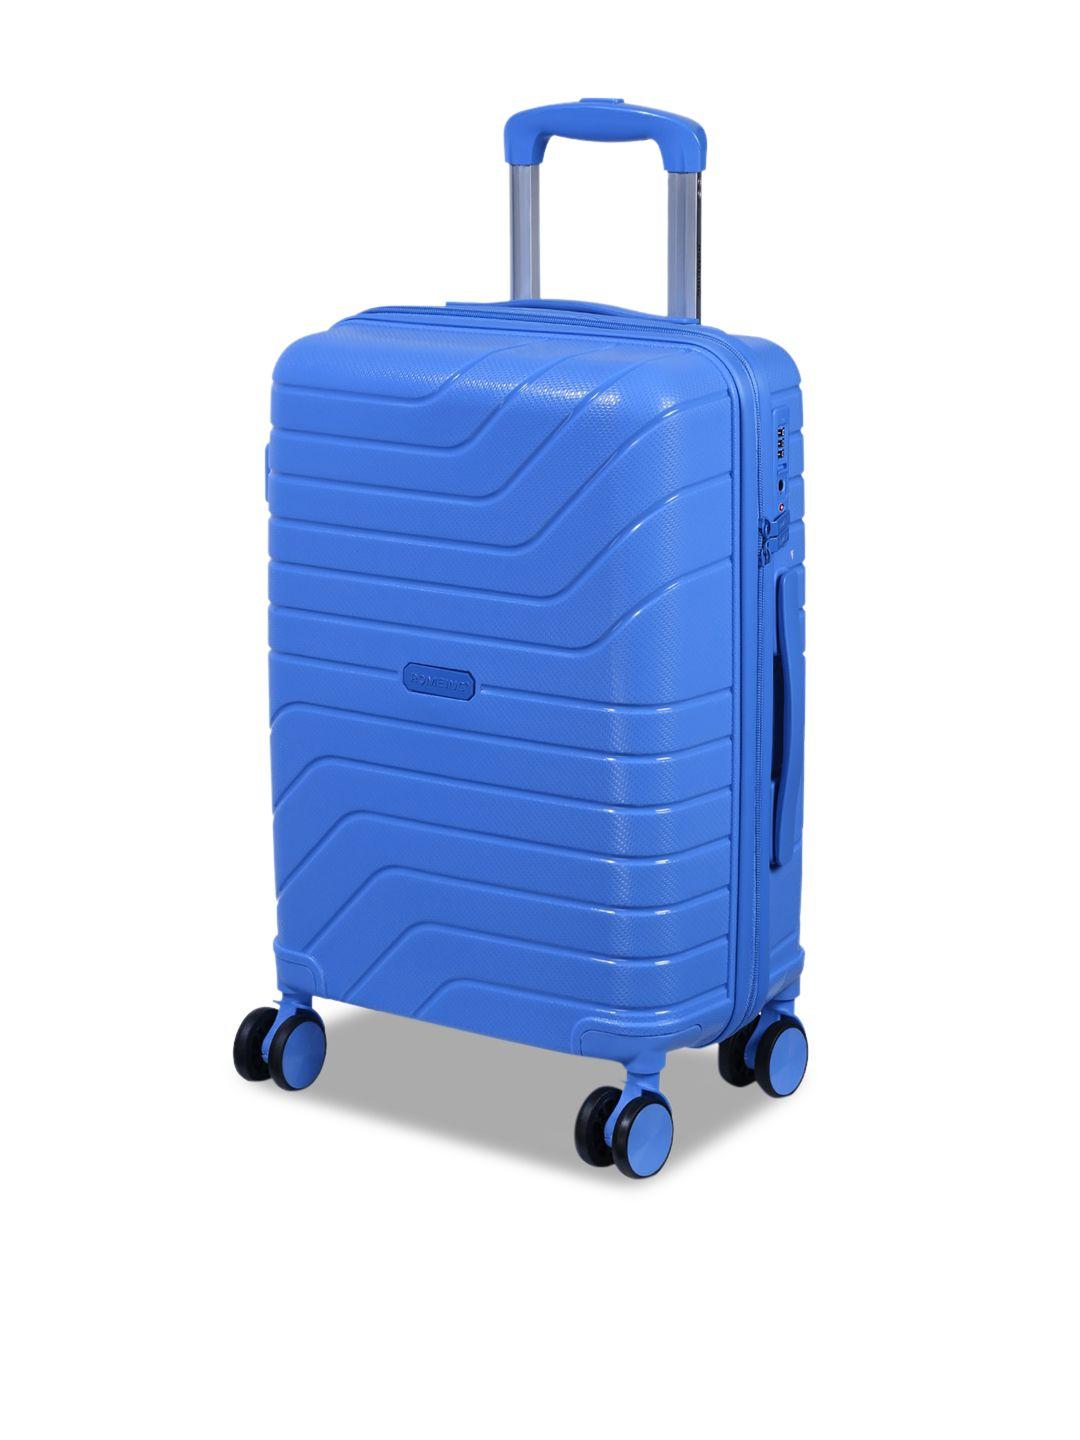 romeing tuscany sky blue textured hard sided polypropylene cabin trolley suitcase